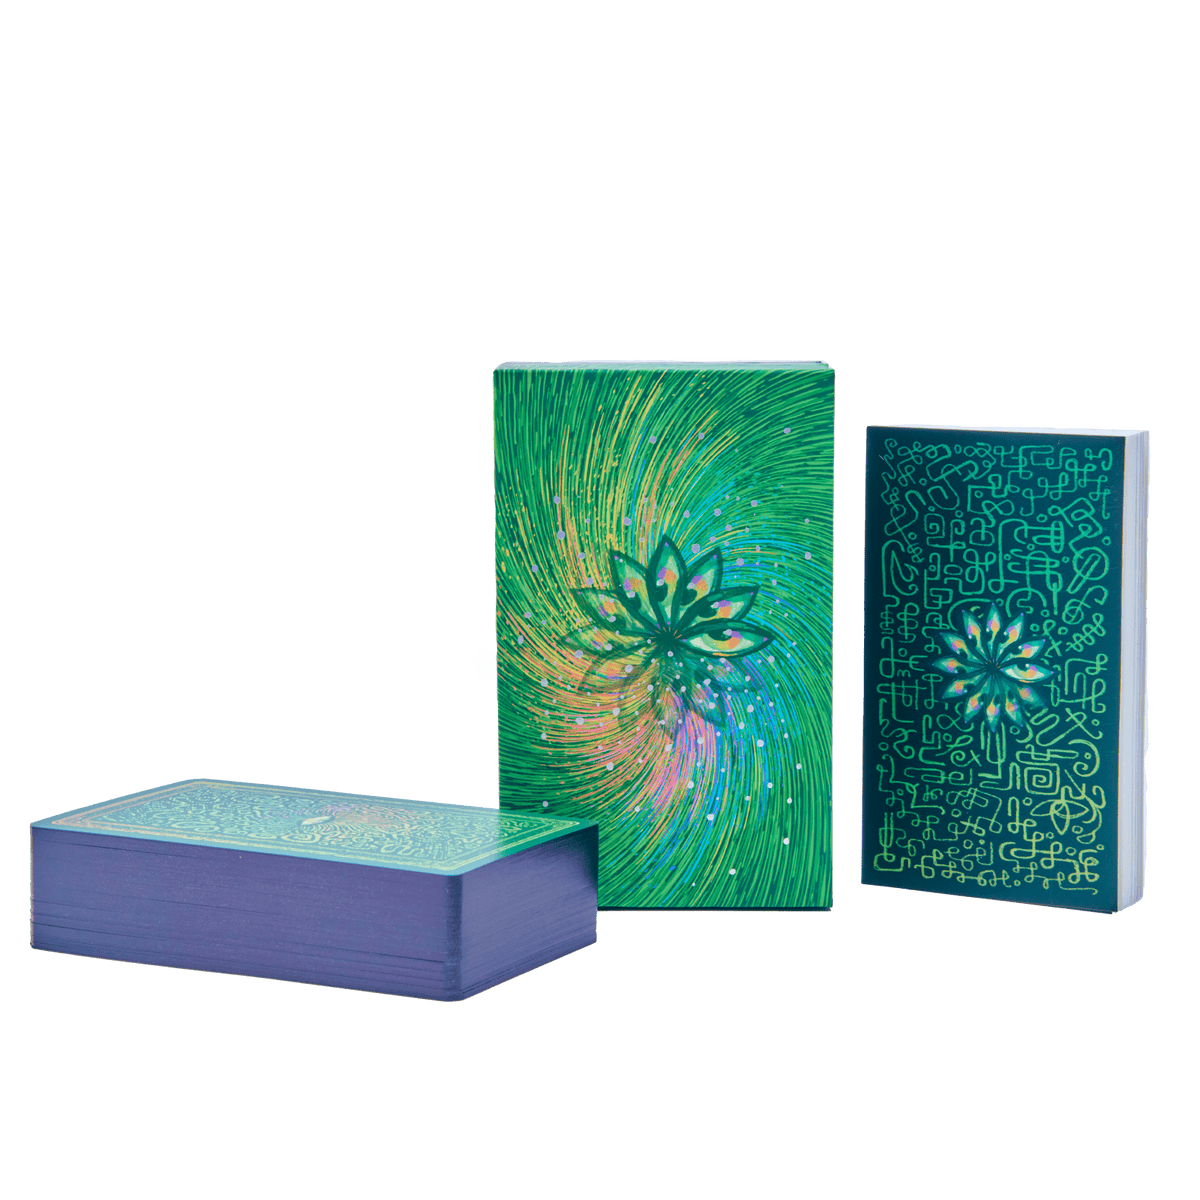 Cosma Visions Oracle Deck by James R. Eads Free Shipping – Tarot Stack